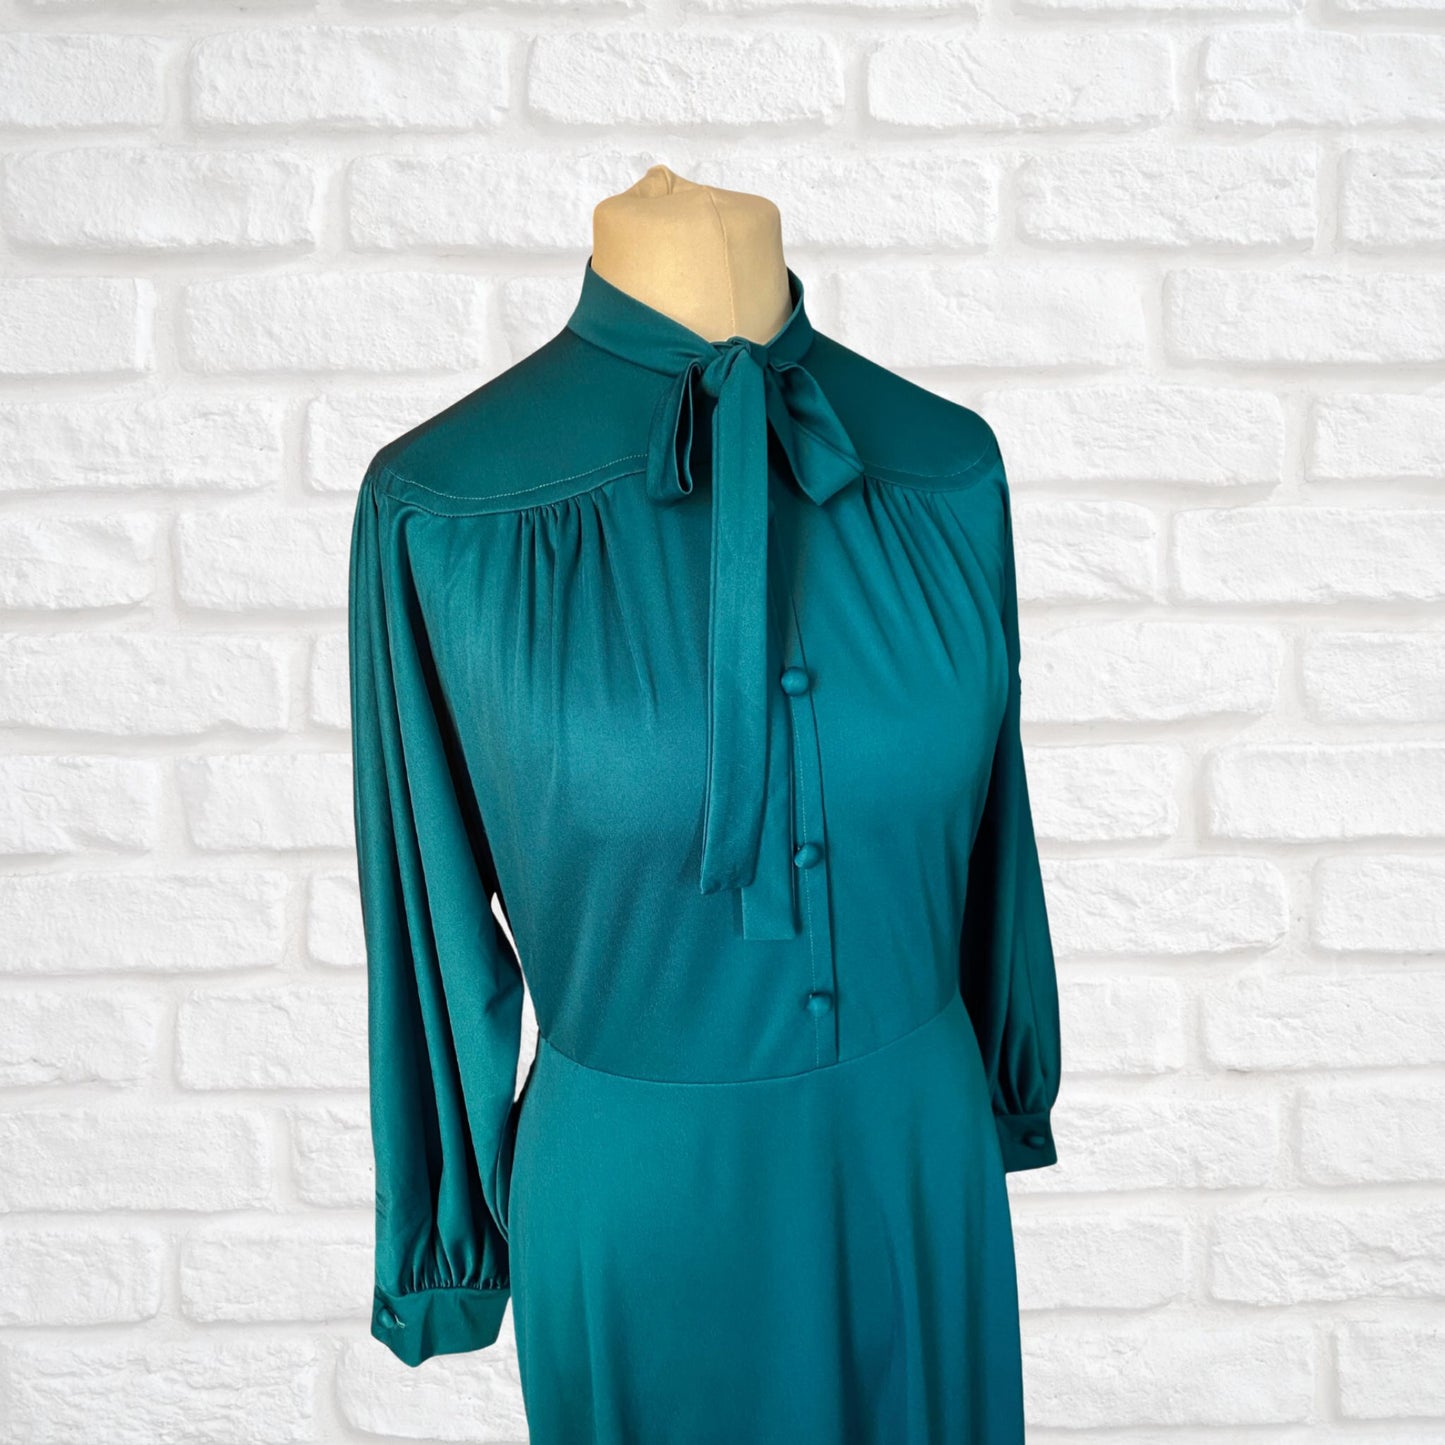 70s Vintage Teal Long Sleeved Maxi Dress by Peggy Page. Approx UK size 14-16